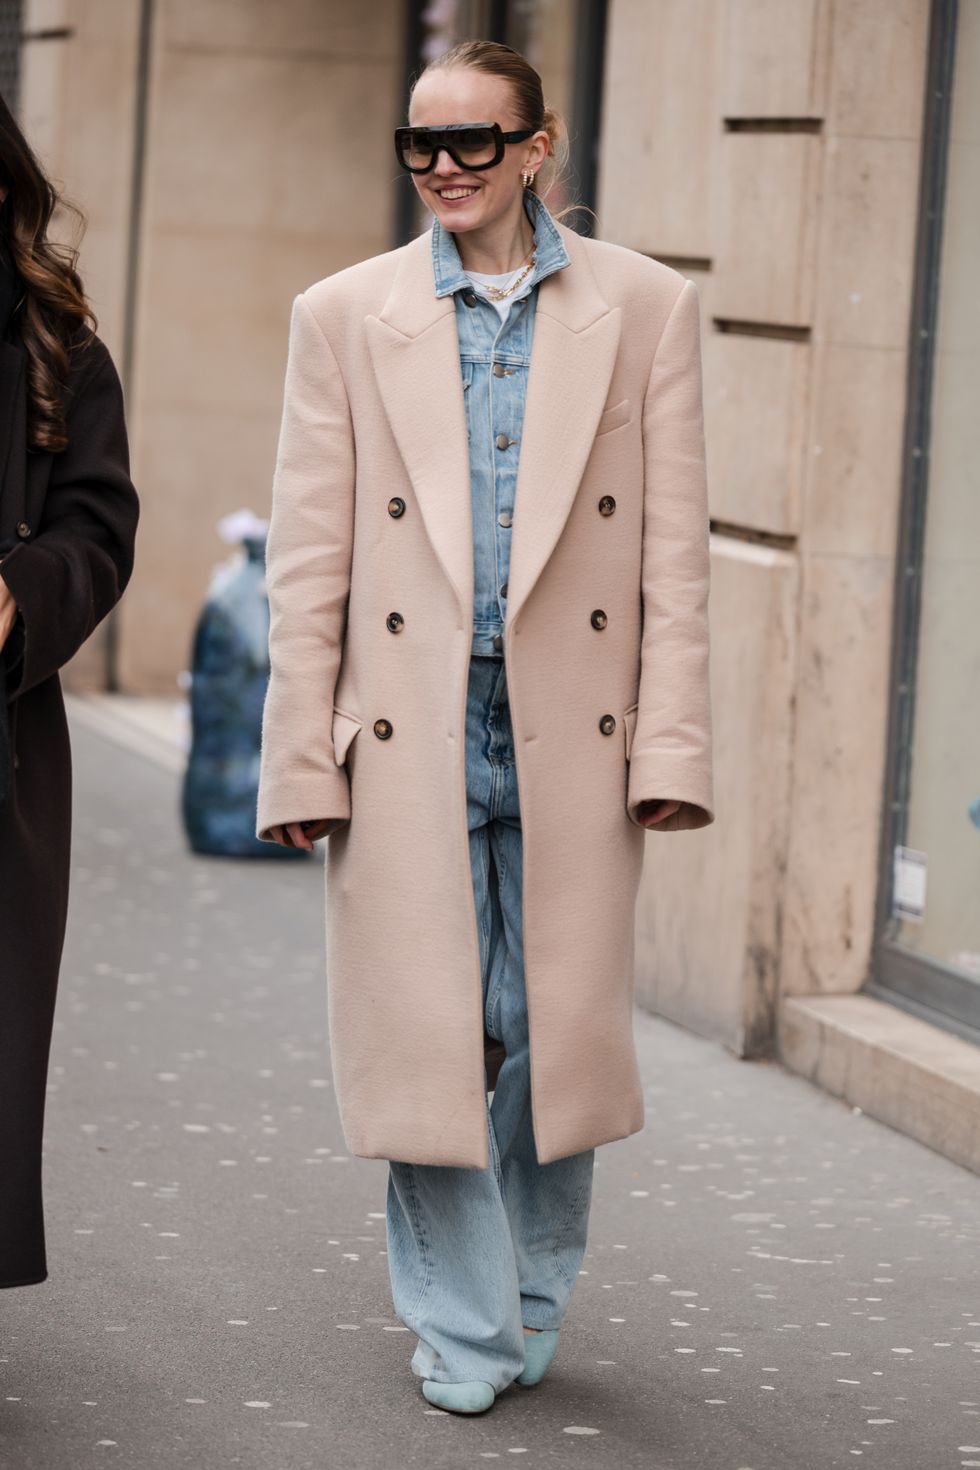 paris, france february 28 alexandra carl wears light pink coat, denim jacket, light blue jeans, sunglasses, outside dries van noten, during the womenswear fallwinter 20242025 as part of paris fashion week on february 28, 2024 in paris, france photo by claudio laveniagetty images